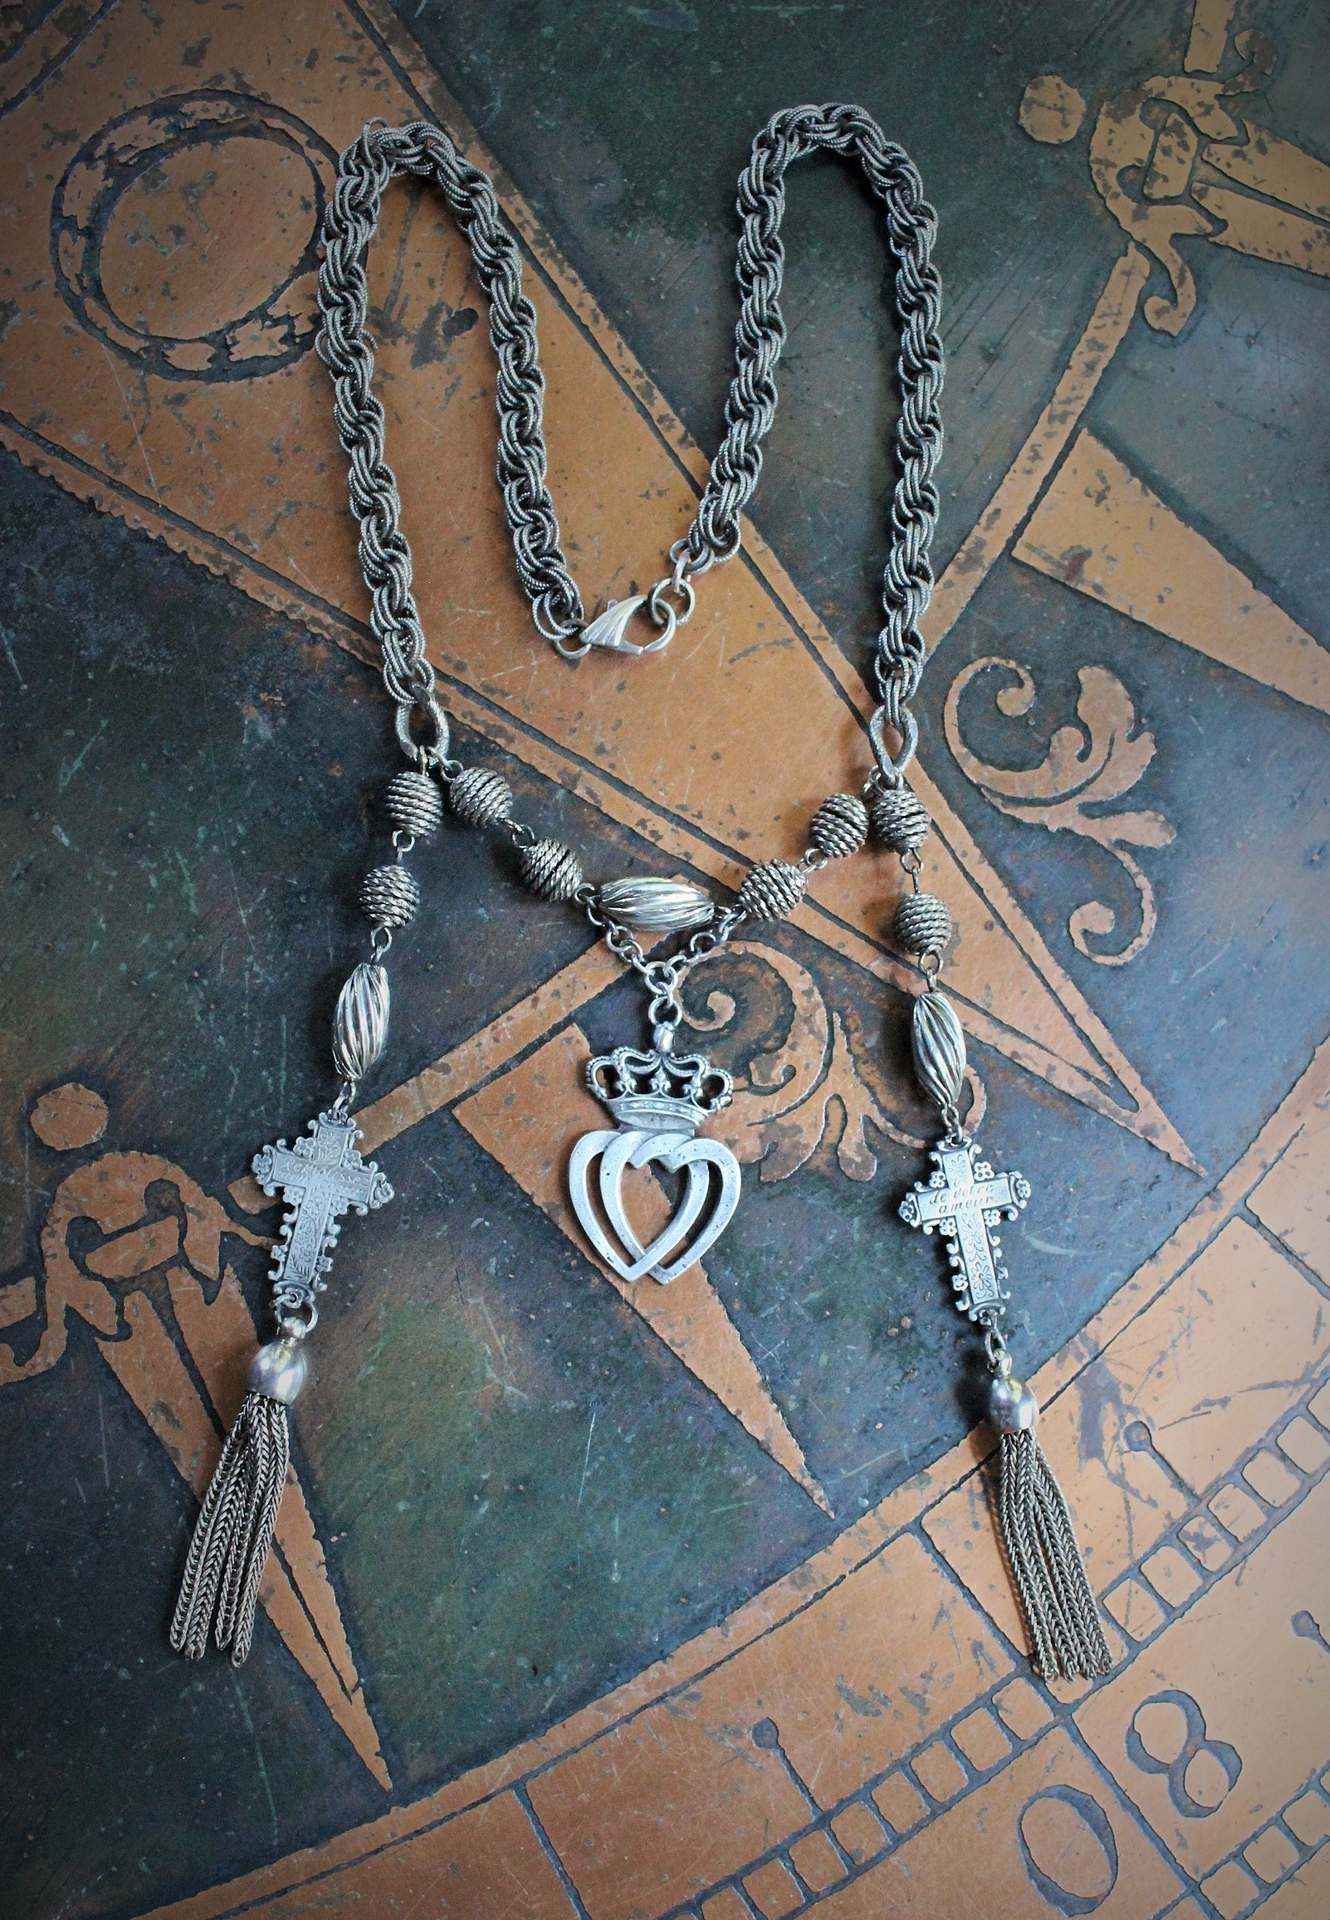 Fill my Heart with Your Love Necklace w/Antique Engraved French Crosses,Antique French Double Crowned Heart Medal, Antique Foxtail Chain Tassels